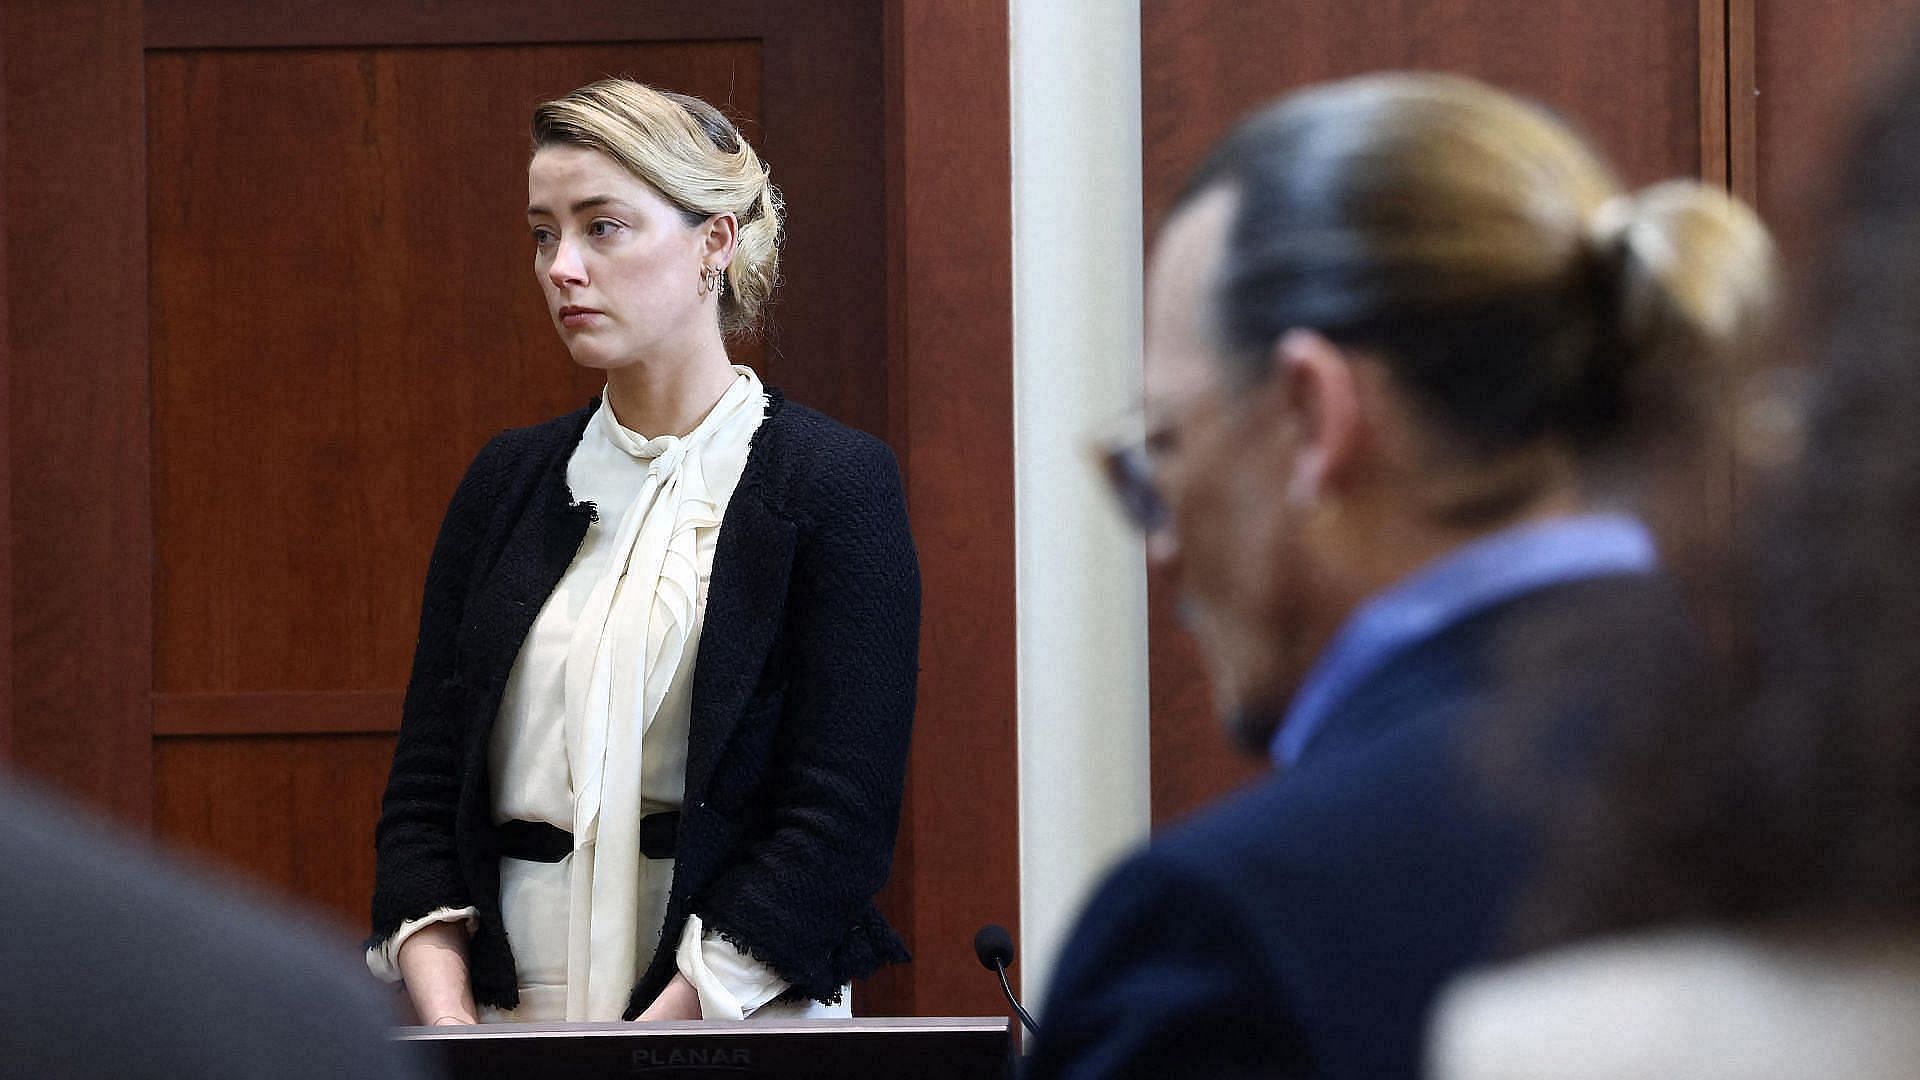 Amber Heard and Johnny Depp during the court trial (Image via Jim Lo Scalzo/AFP/Getty Images)